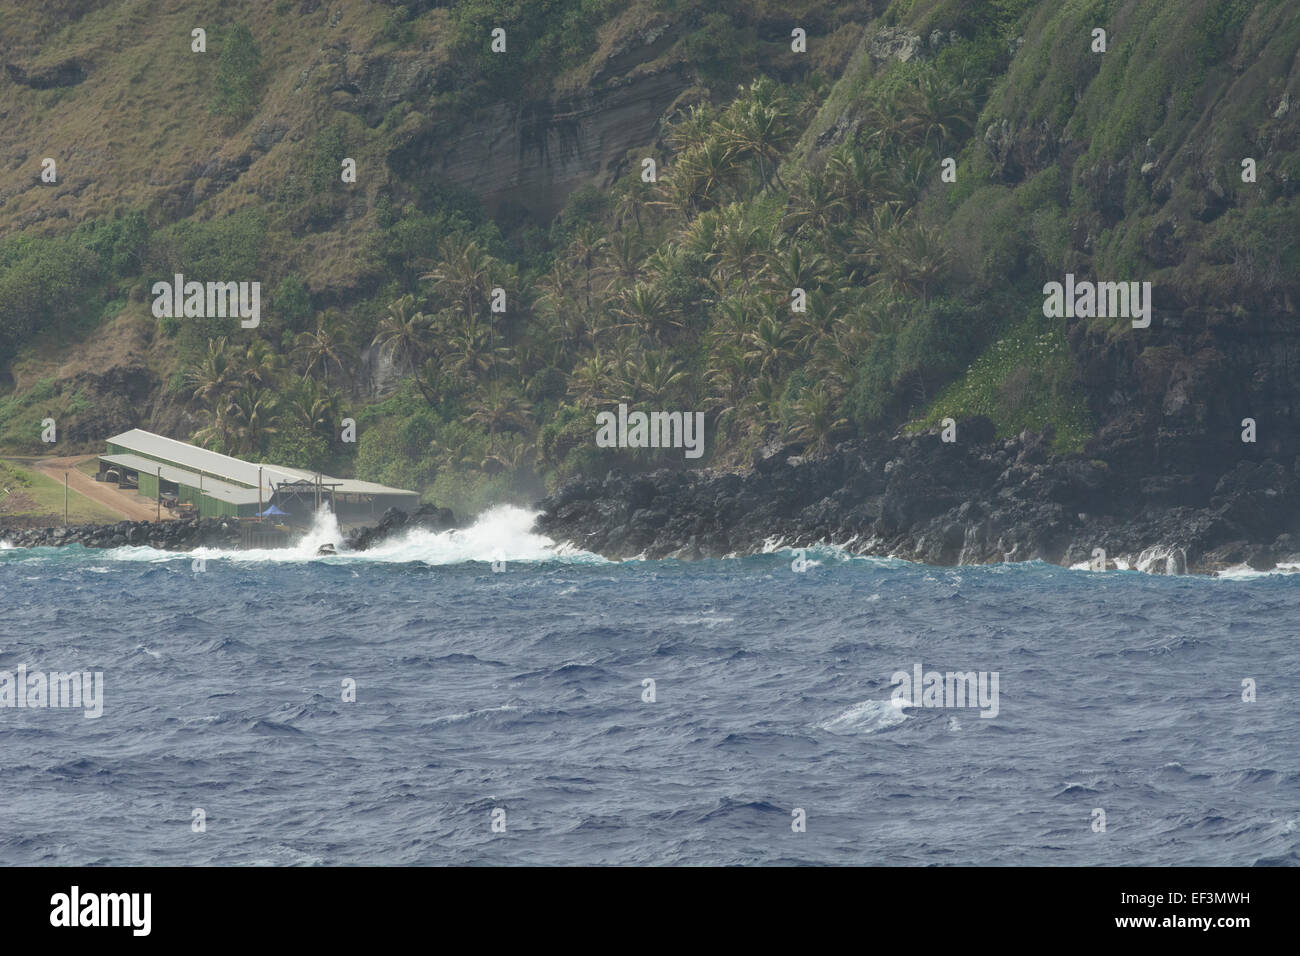 Pitcairn Islands, Pitcairn. Coastal view of rugged volcanic shore. Crashing waves around the boathouse (L) and landing site. Stock Photo